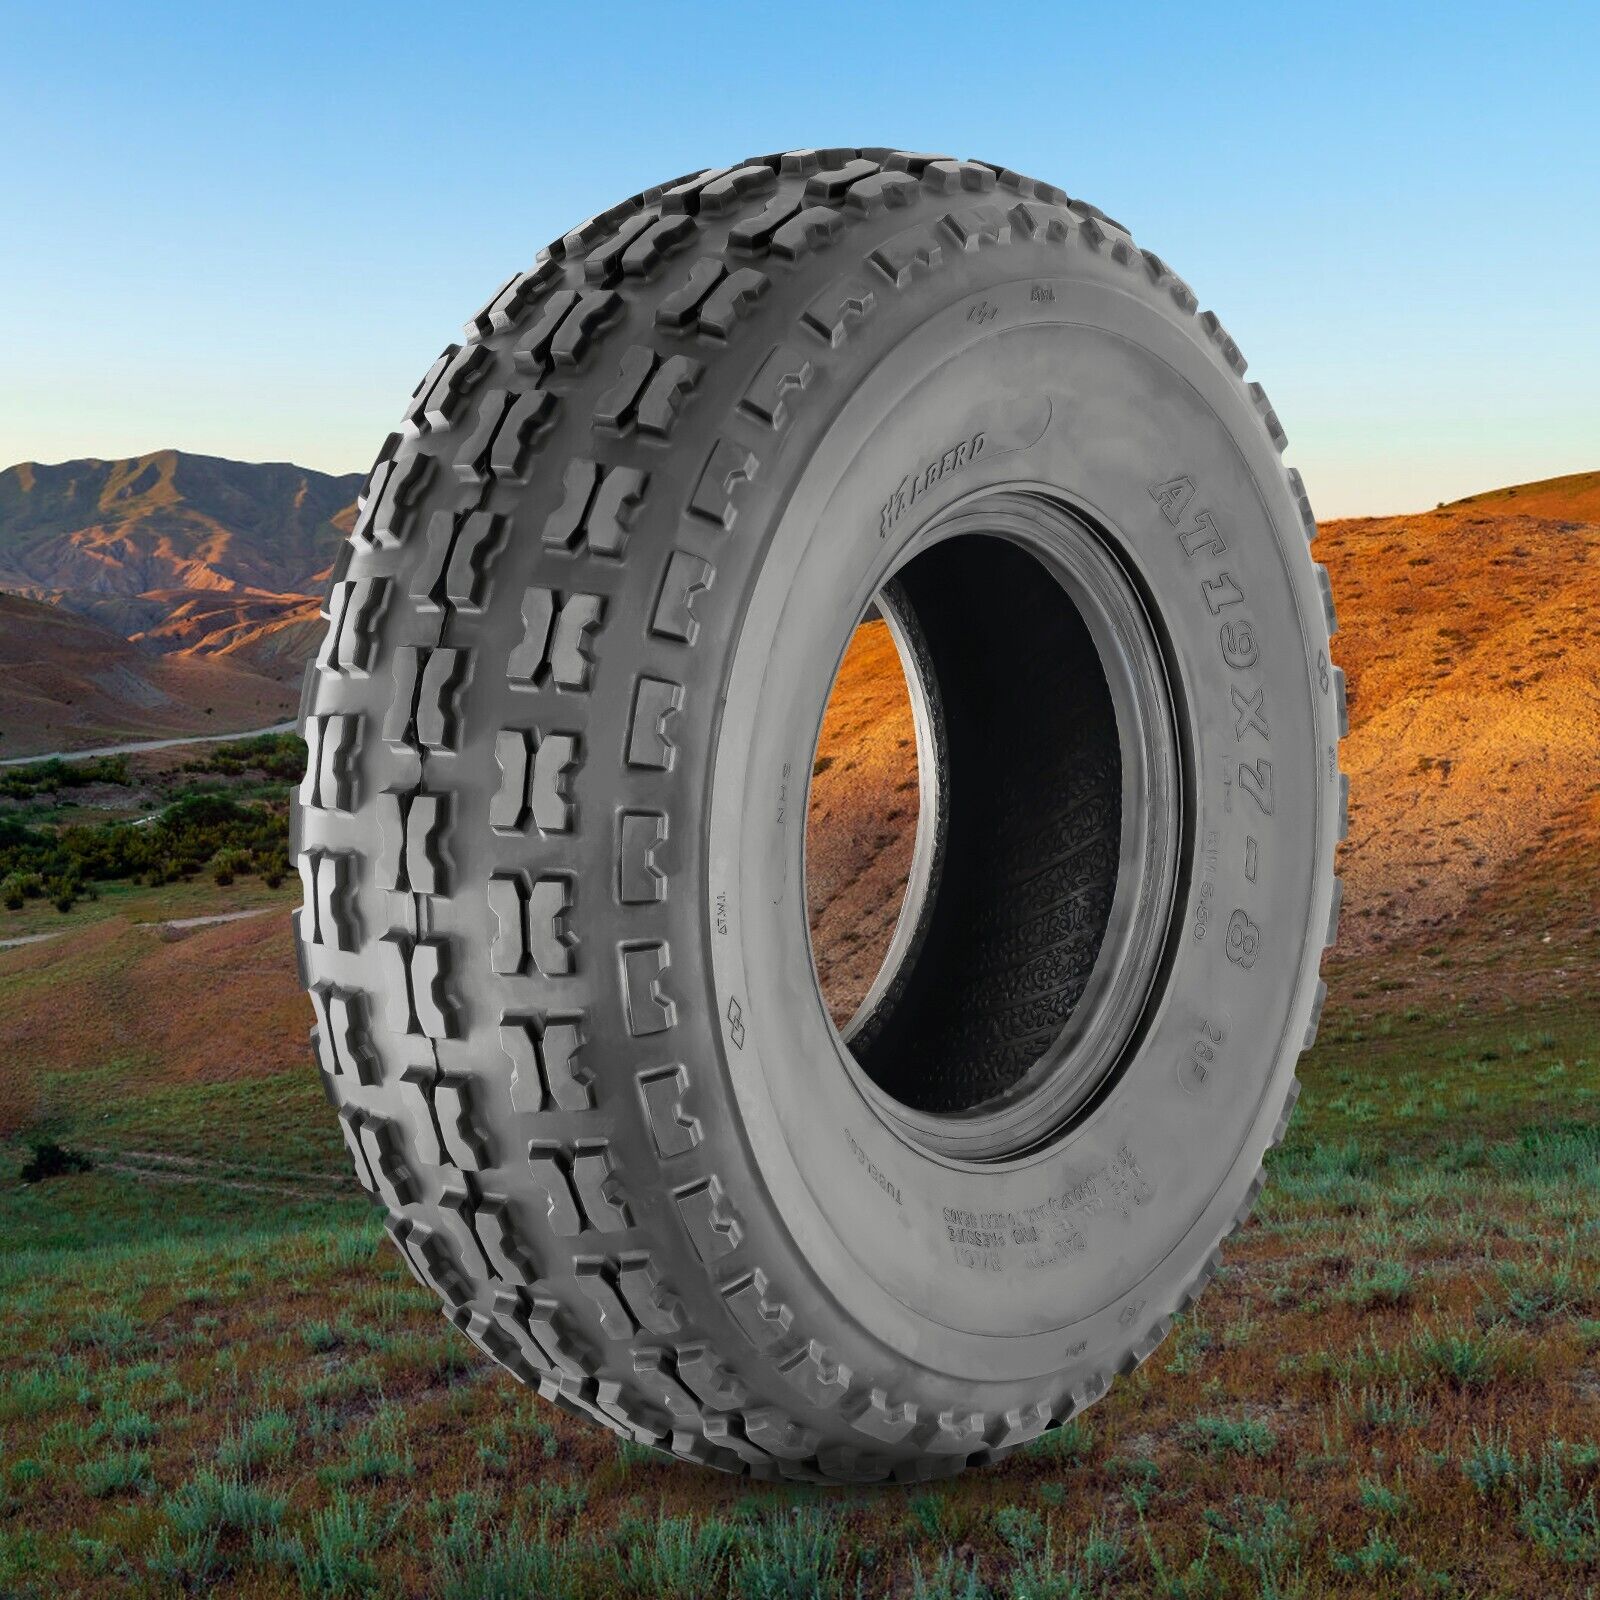 Upgrade 19x7-8 ATV Tire 4Ply Heavy Duty 19x7x8 19x7.00-8 Tubeless Replacement